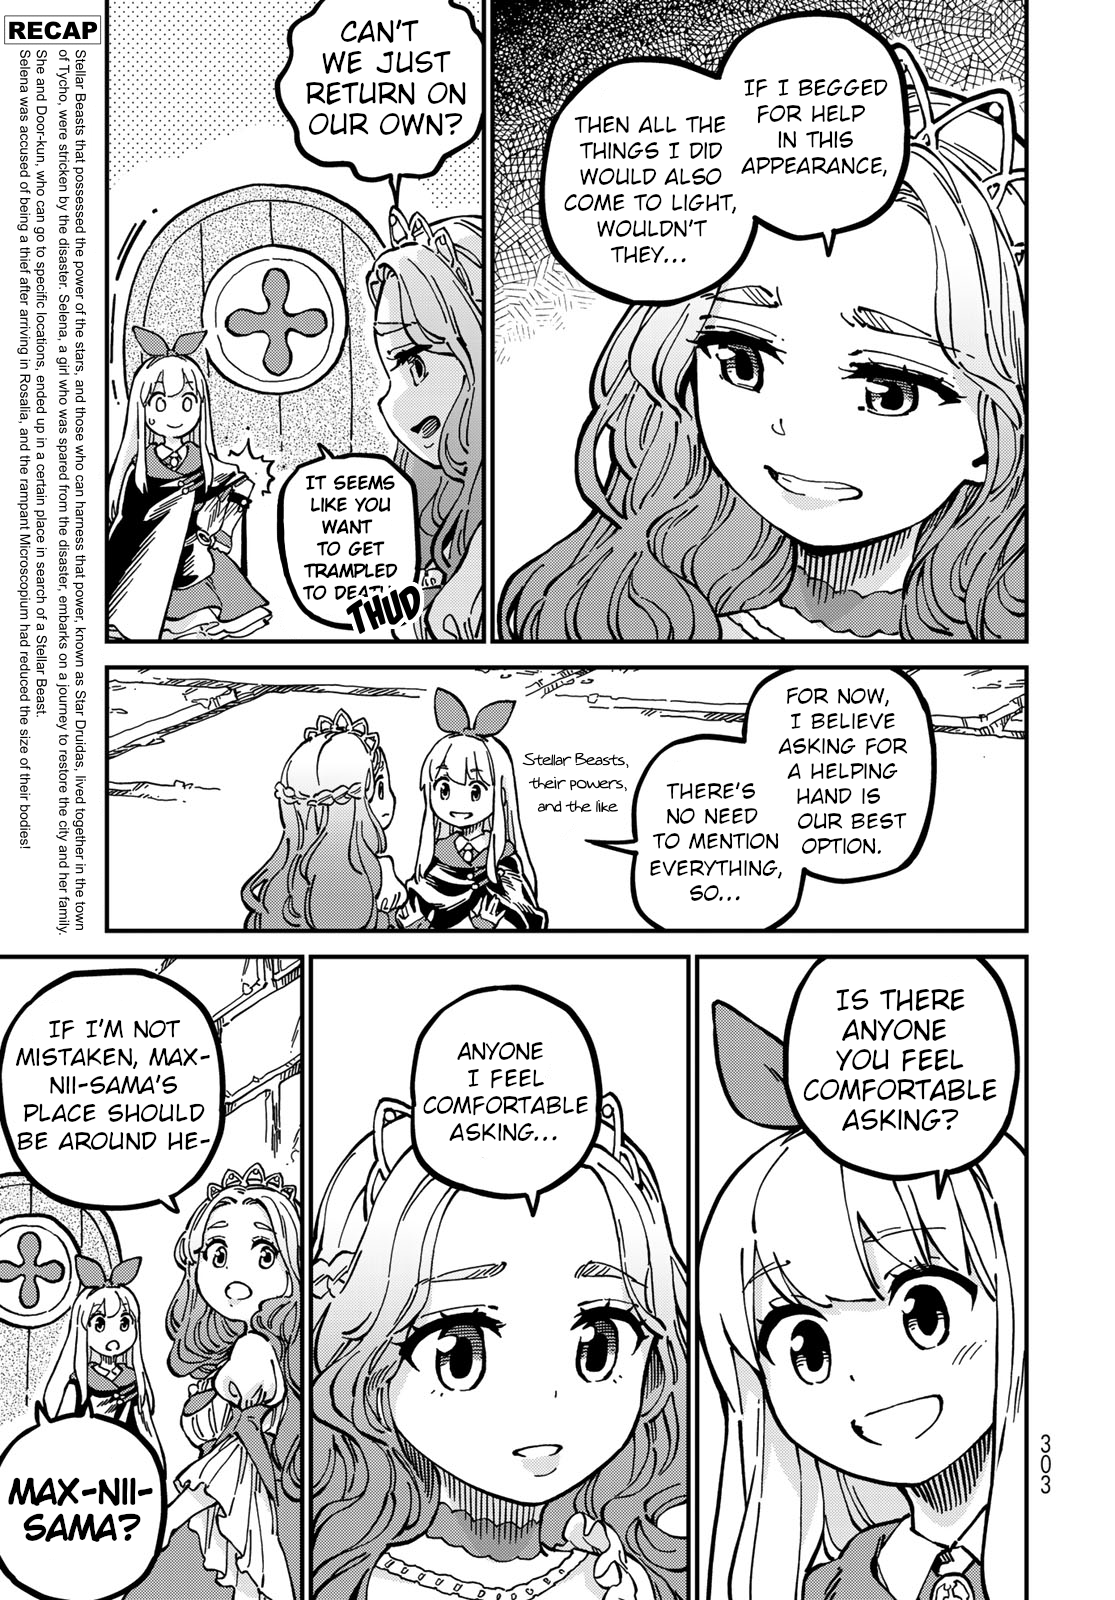 Hoshi Tsukai Selena Vol.1 Chapter 3: What We Can Do Now - Picture 3